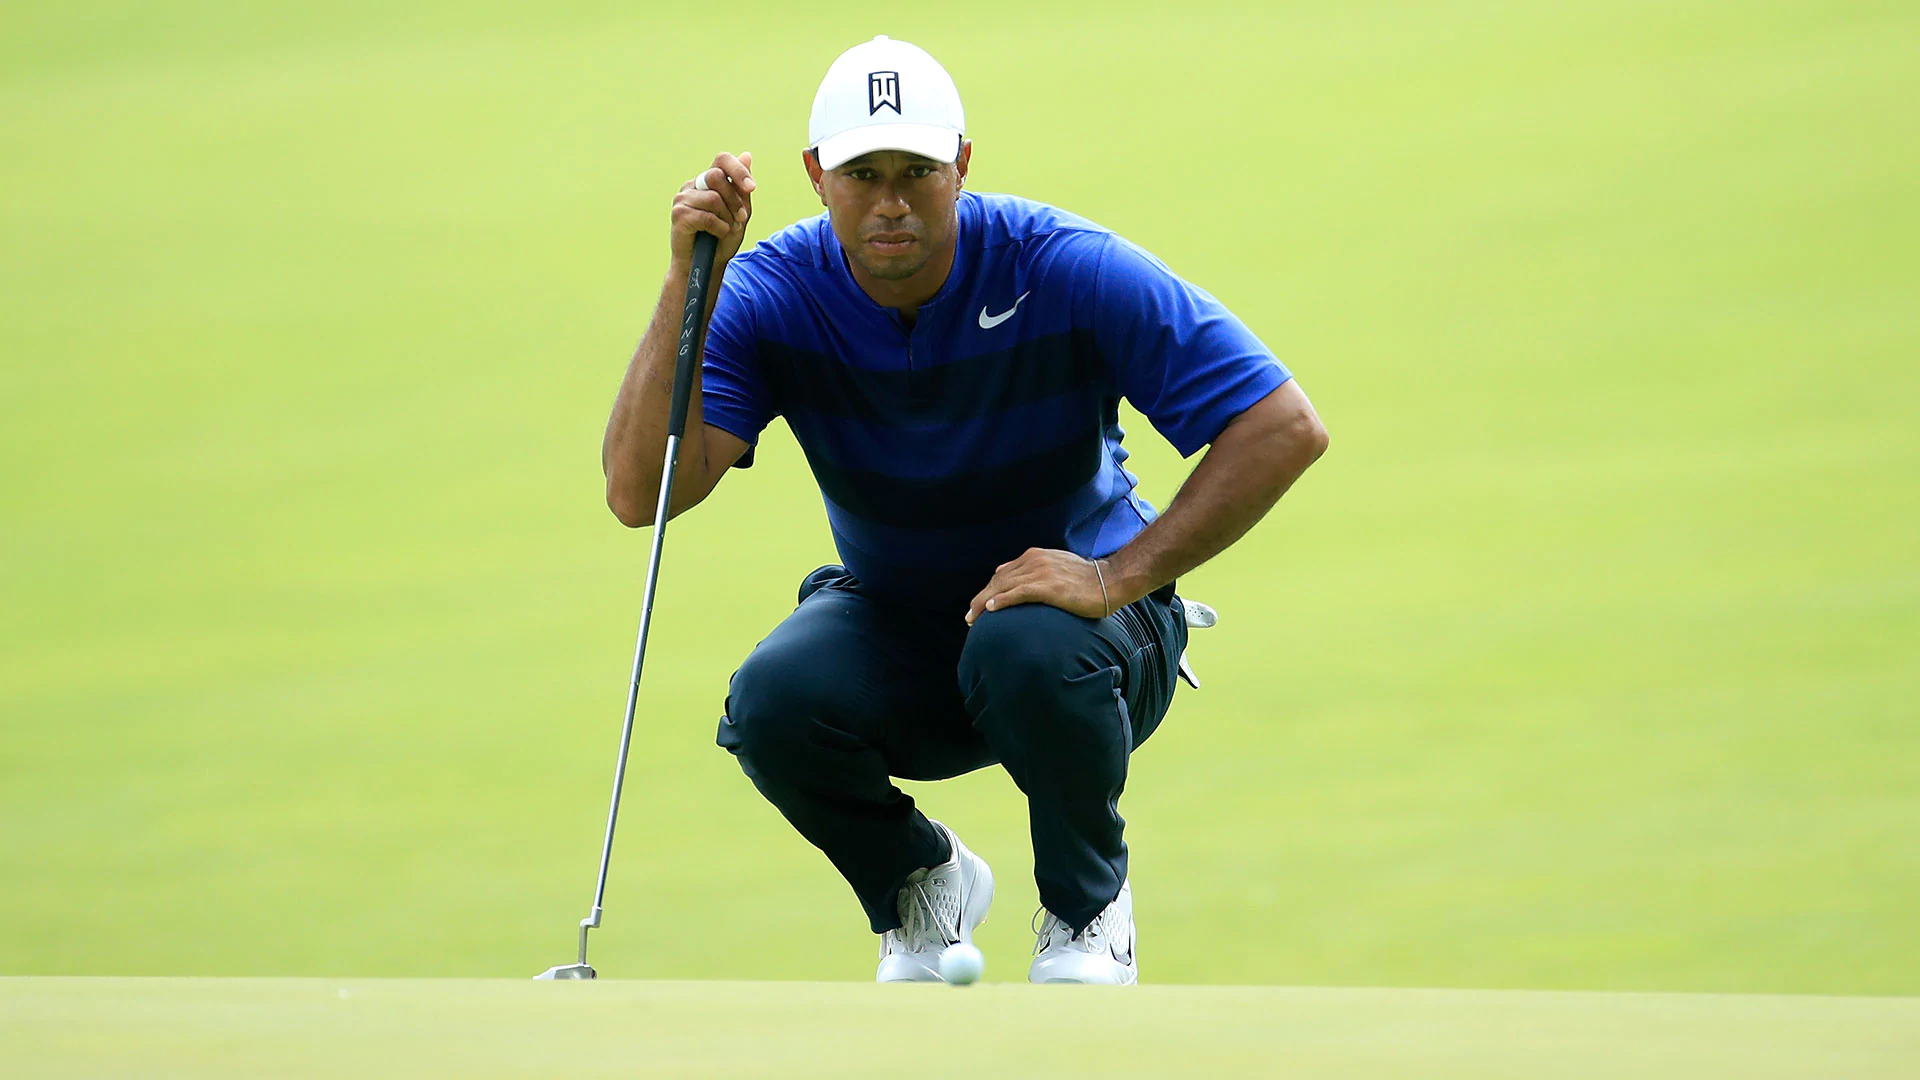 Tiger on 6-footer before delay: Wanted to hit that putt